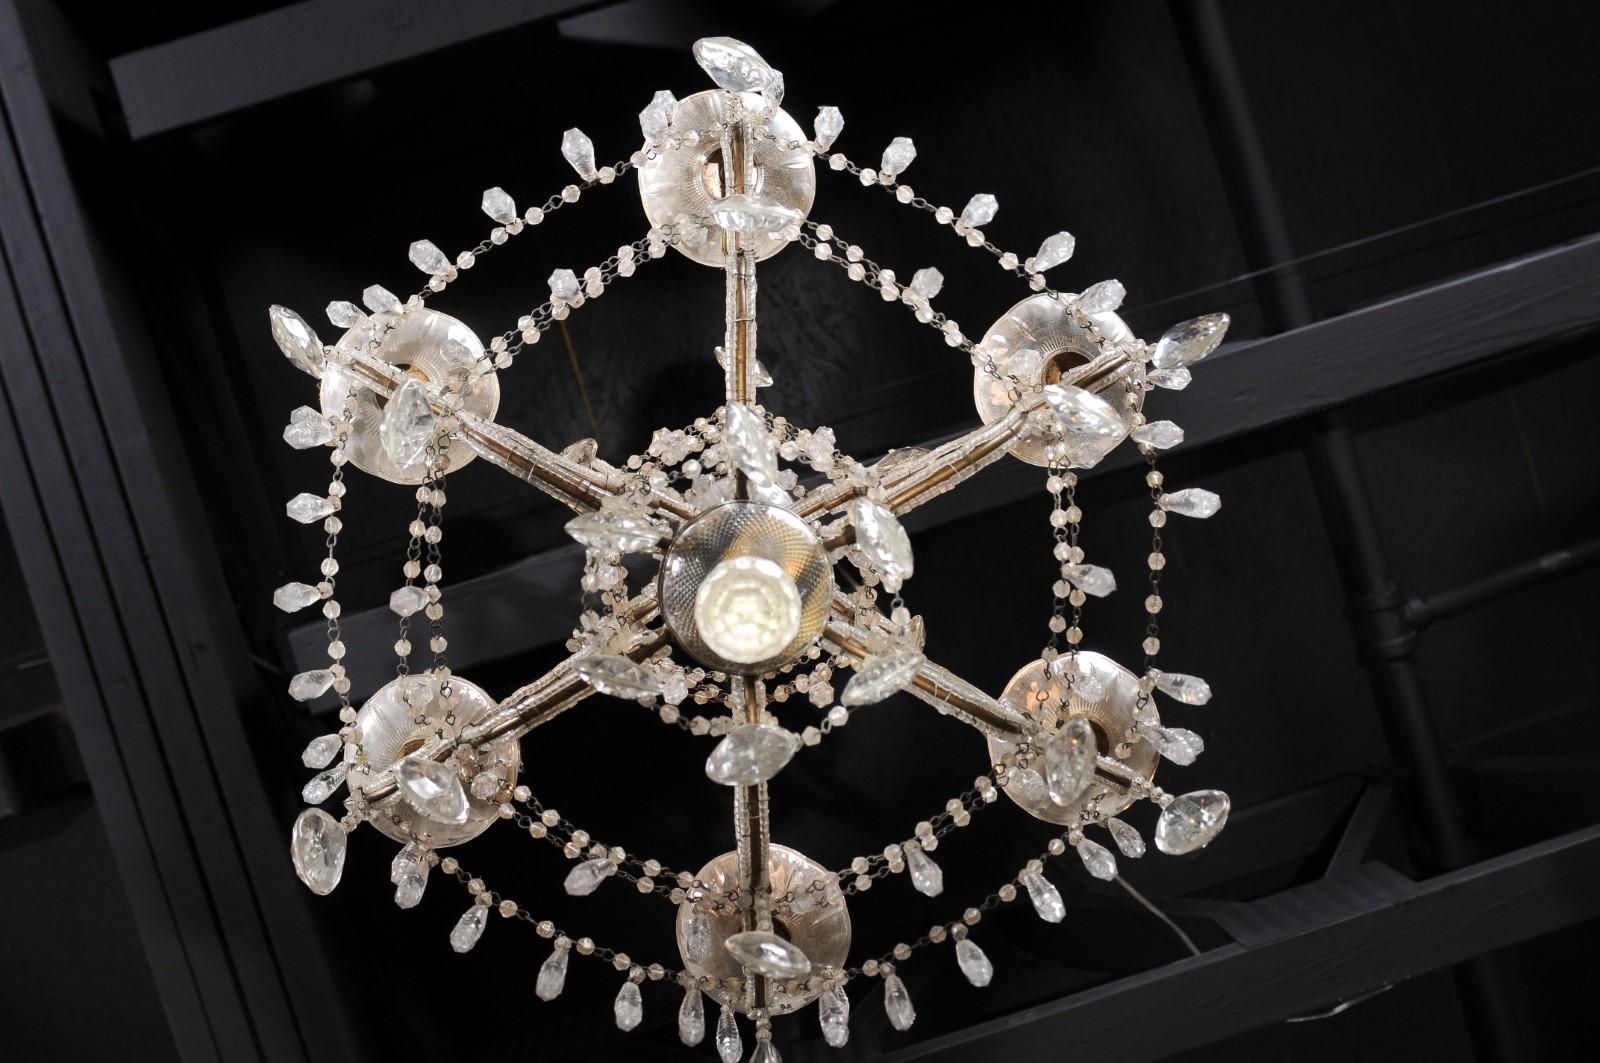 Italian 19th Century Six-Light Chandelier with Beaded Arms and Spear Crystals For Sale 4